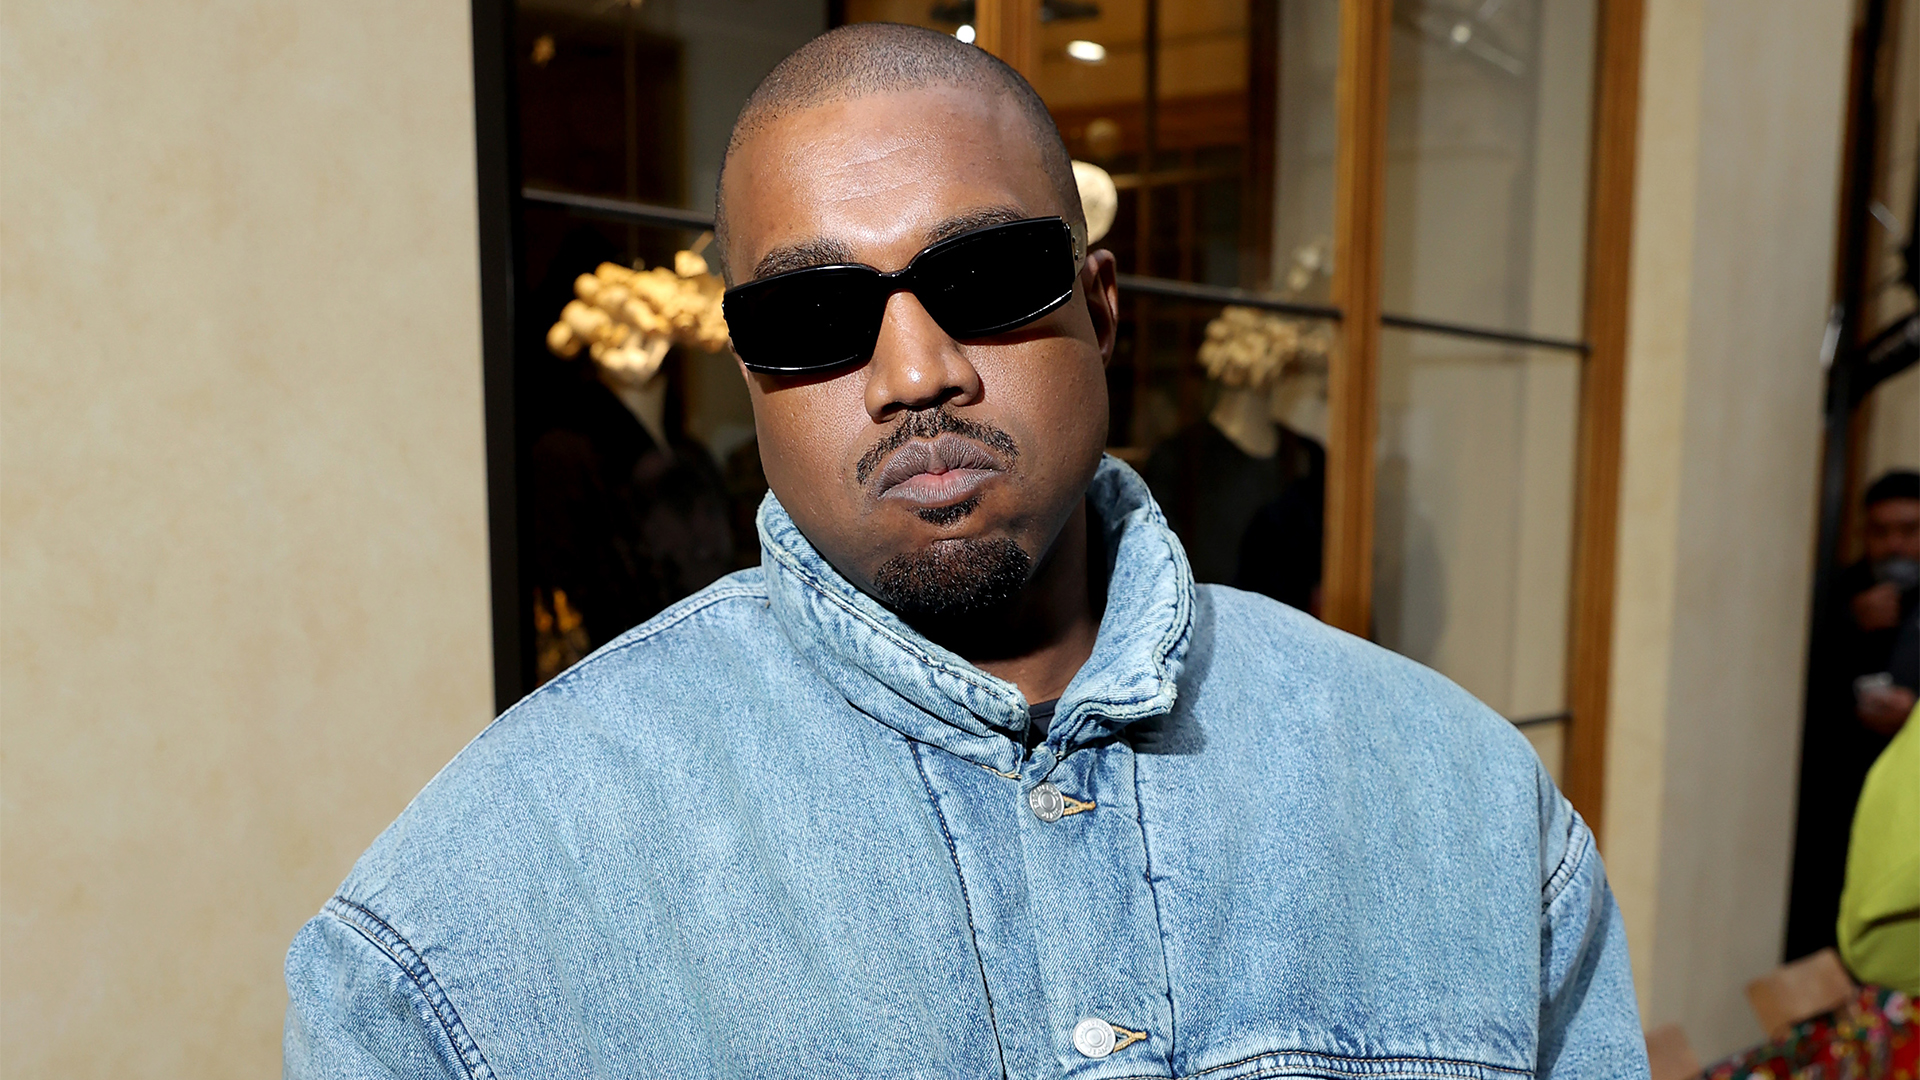 Kanye West Doesn't Have Current Plans For The Metaverse And NFTs — 'For Now I'm Not On That Wave'